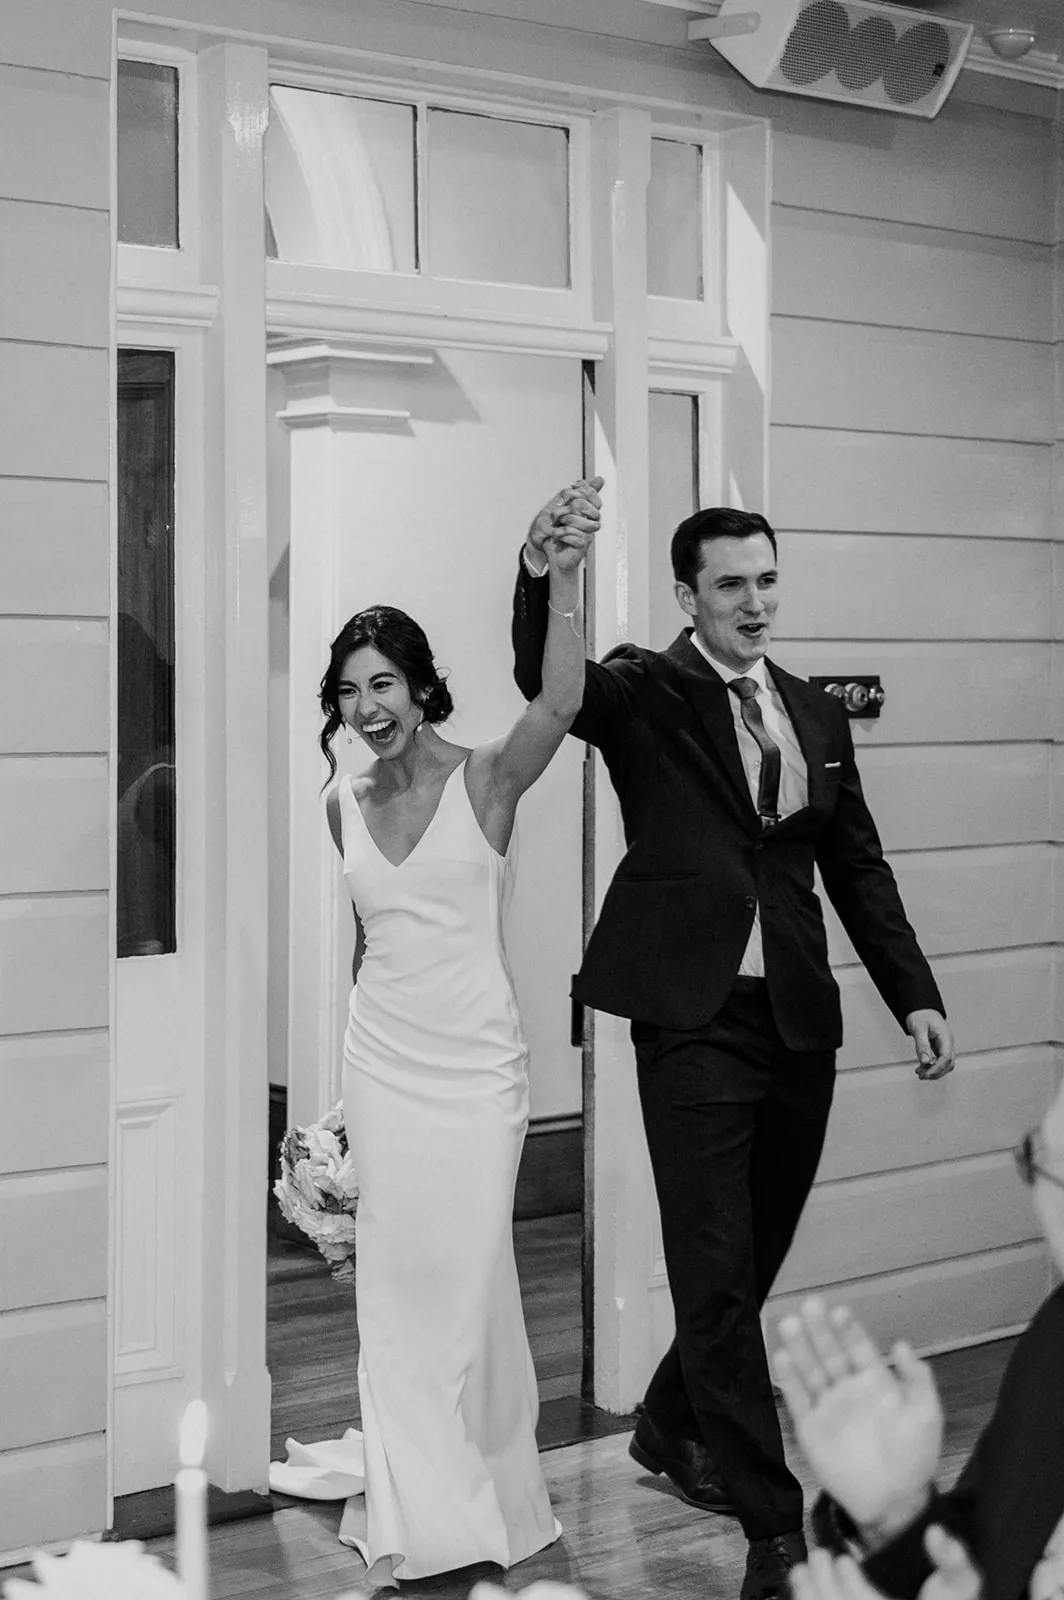 A newlywed couple holds hands and smiles joyfully as they walk into a room. The bride is in a white gown holding a bouquet, and the groom is in a dark suit and tie. The room has wooden walls and people are seen clapping in the foreground. The image is in black and white.